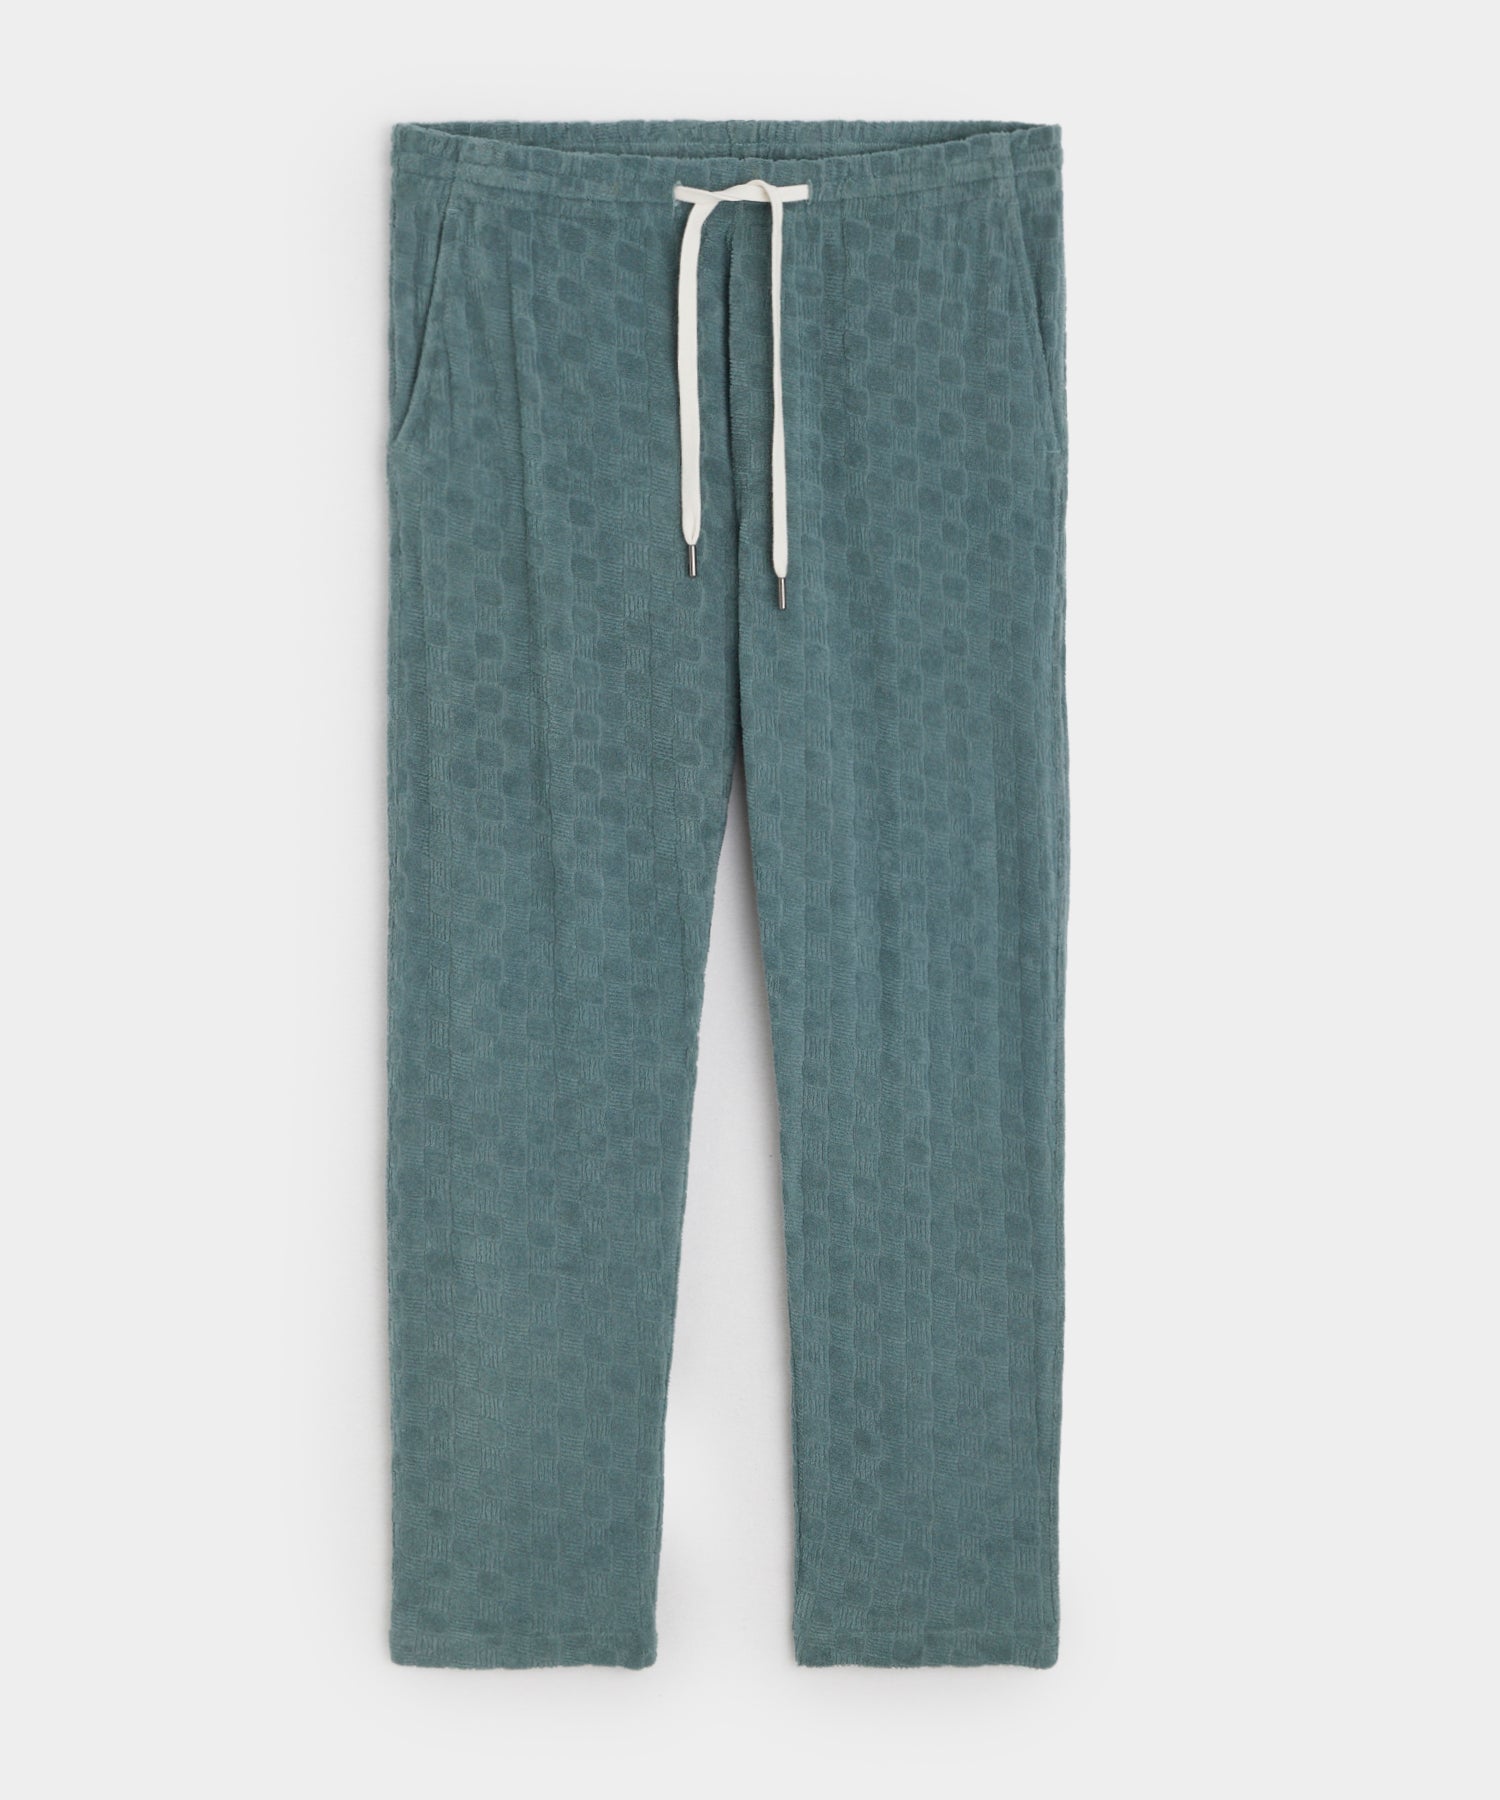 Tile Terry Beach Pant in Green Pewter